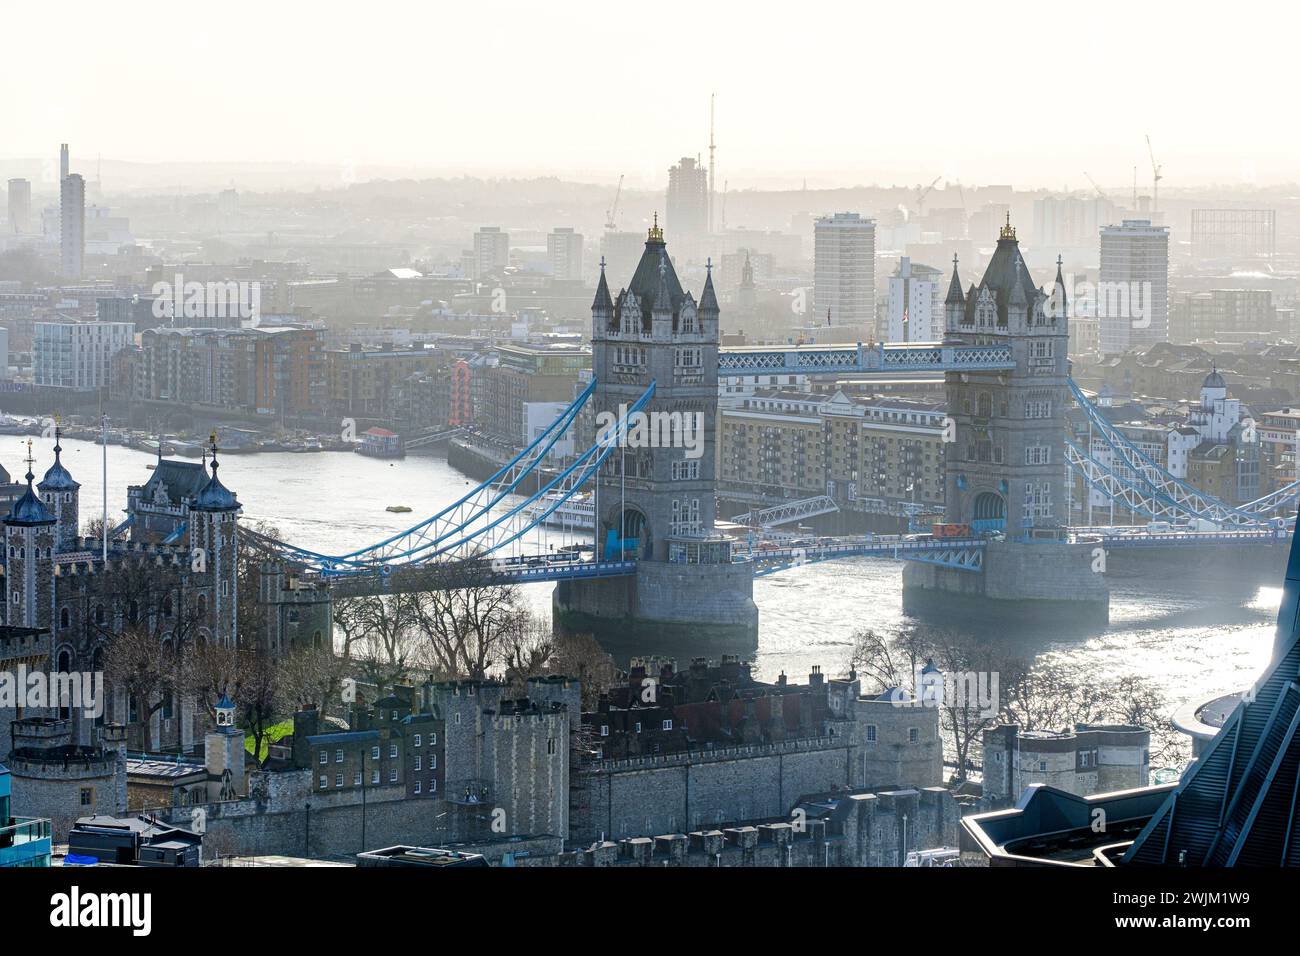 The beauty and history of Tower Bridge, the world's most famous bascule bridge, as it spans the Thames and connects the city. Tower Bridge, a marvel o Stock Photo